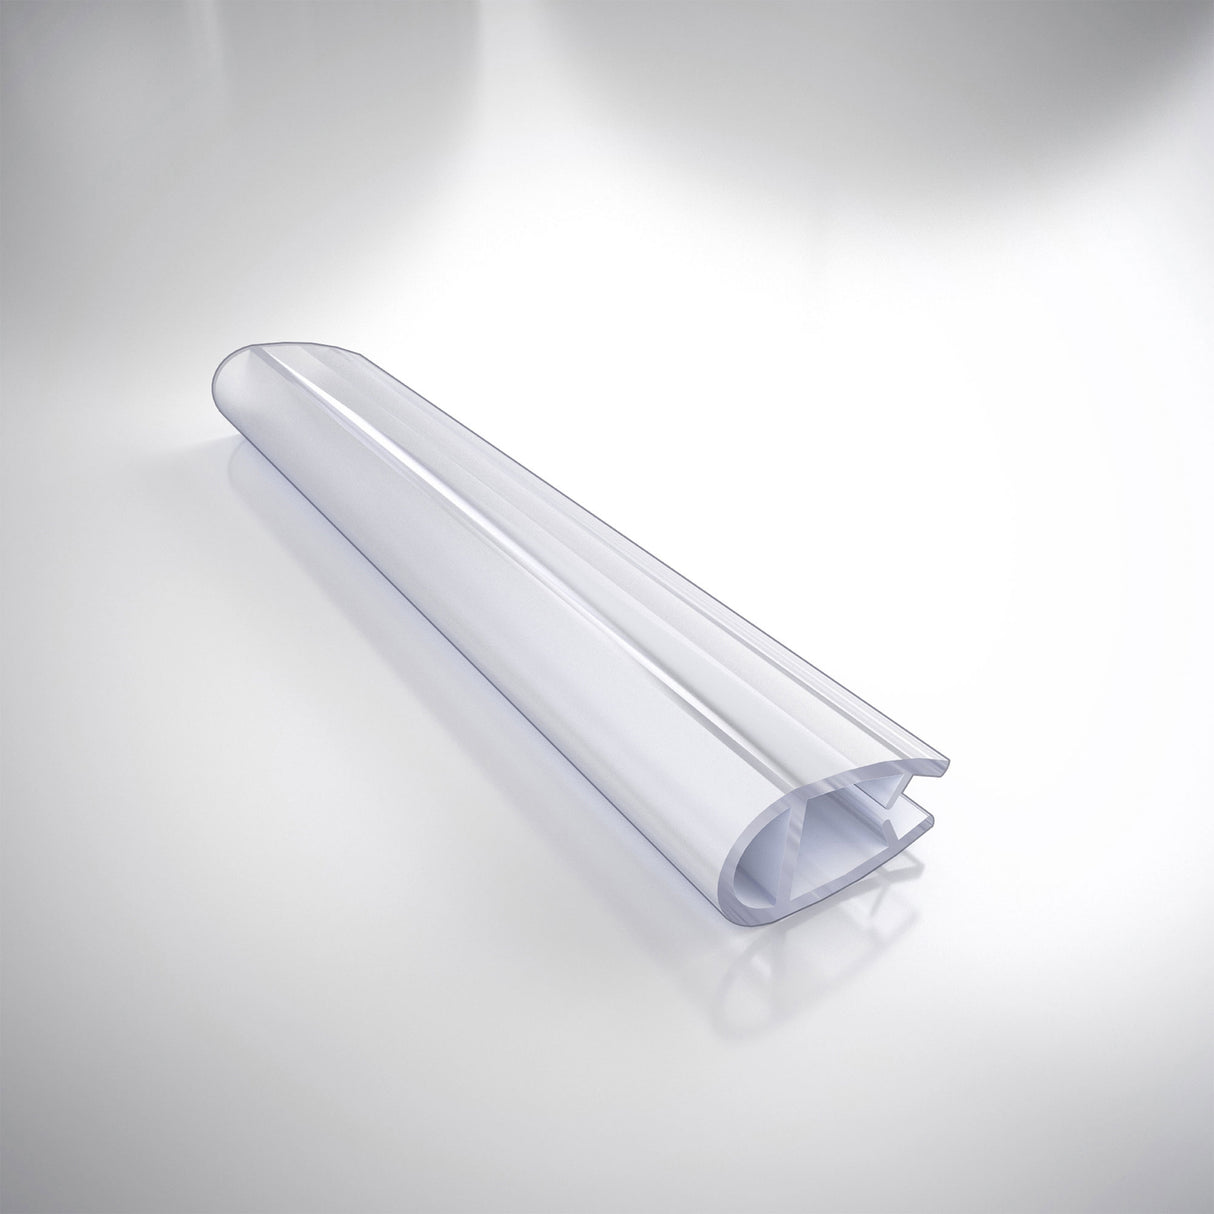 Clear Bumper Seal, 76 in. Length, for 5/16 in. (8 mm.) Glass Shower Door